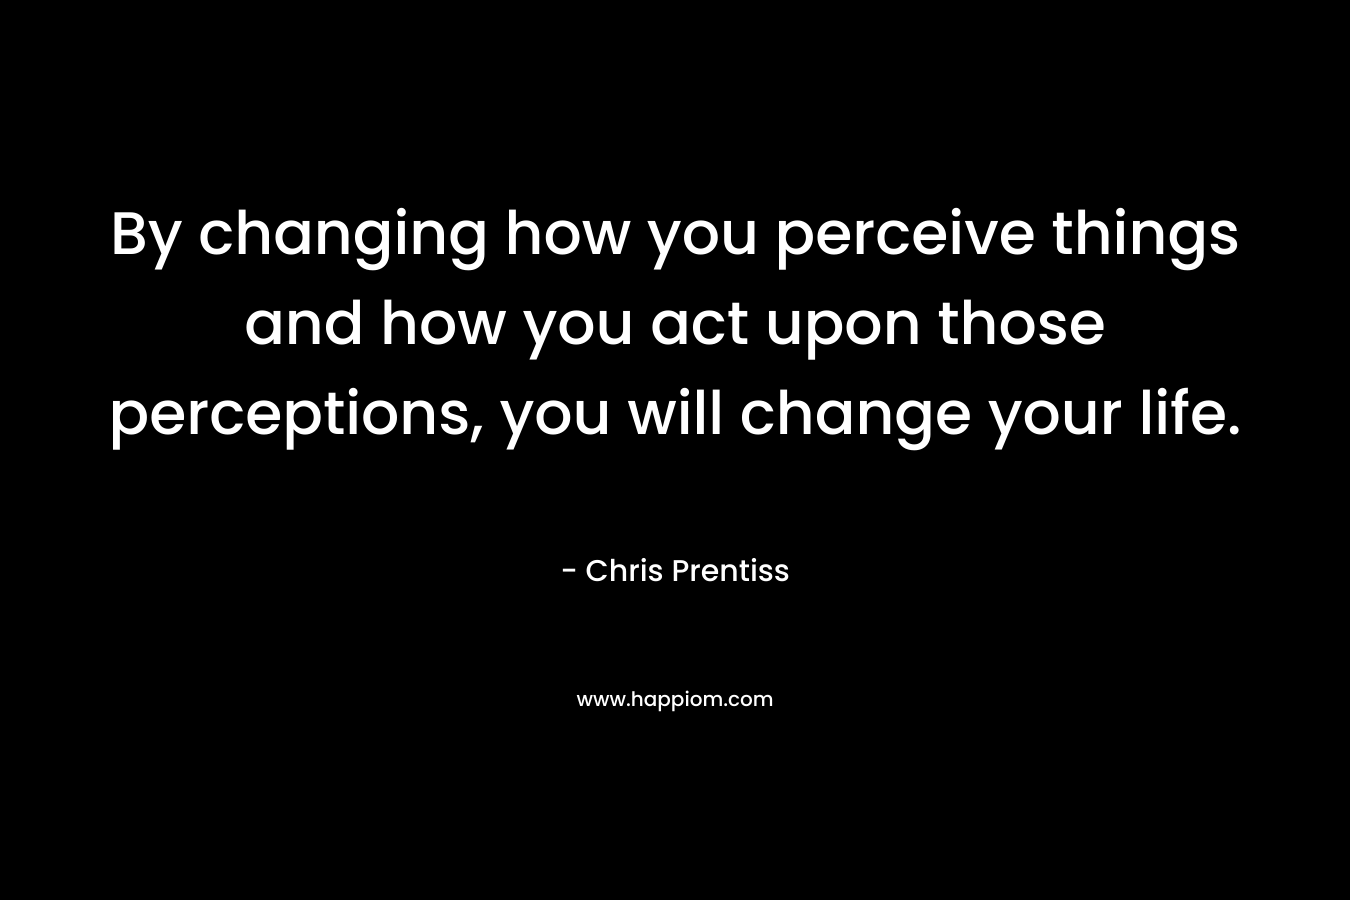 By changing how you perceive things and how you act upon those perceptions, you will change your life. – Chris Prentiss